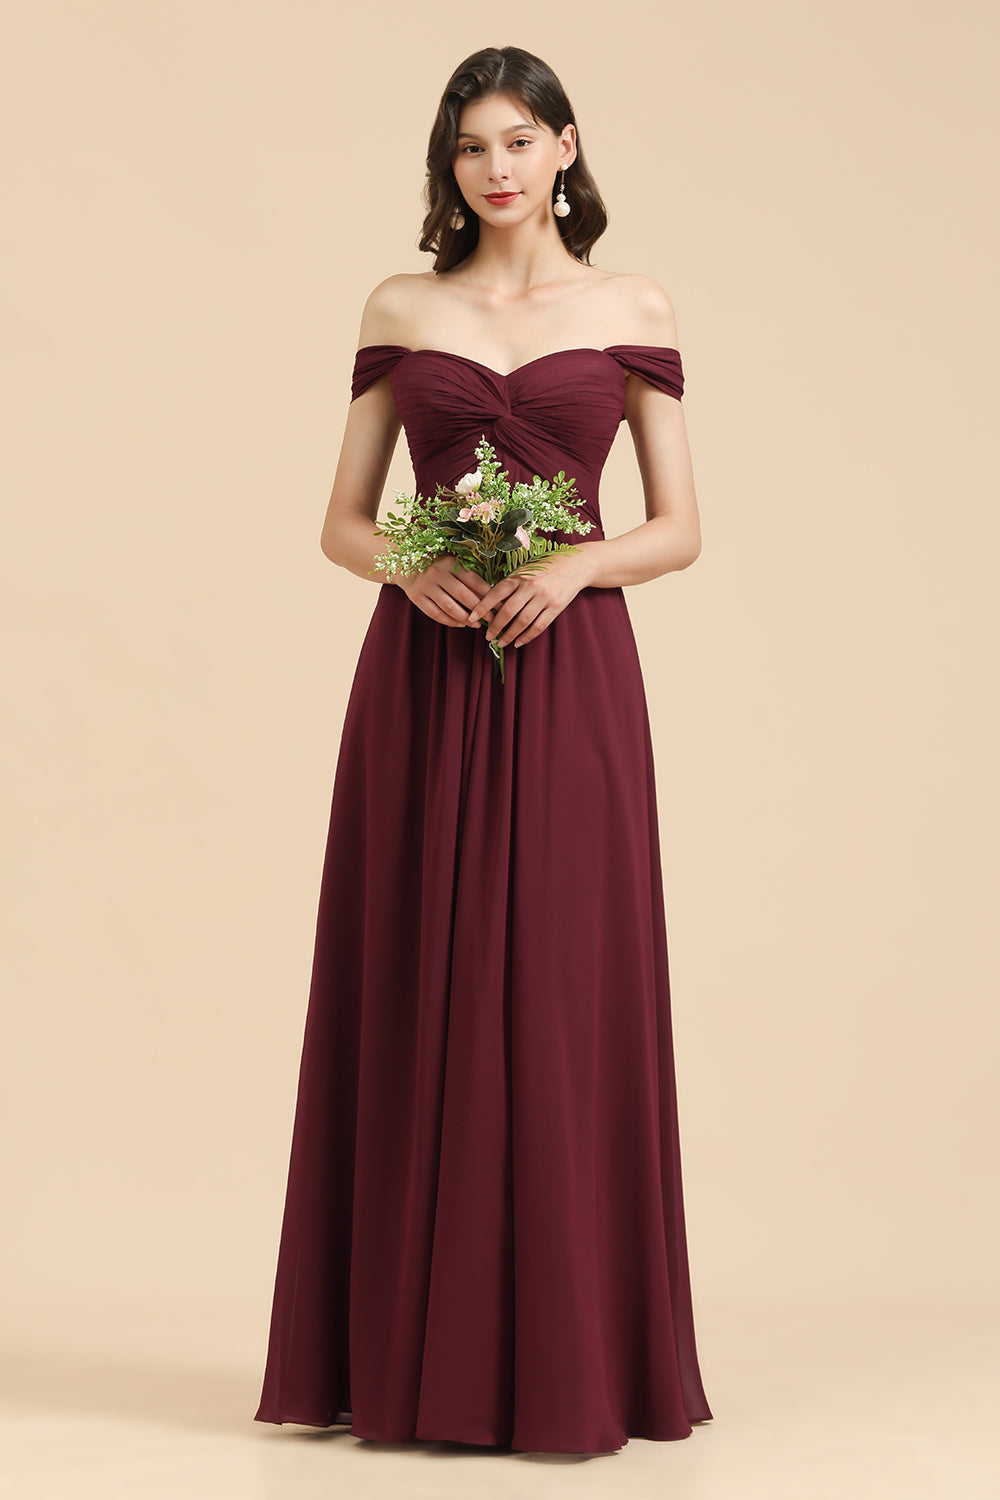 New Arrival A-line Off-the-shoulder Sweetheart Burgundy Long Bridesmaid Dress-misshow.com